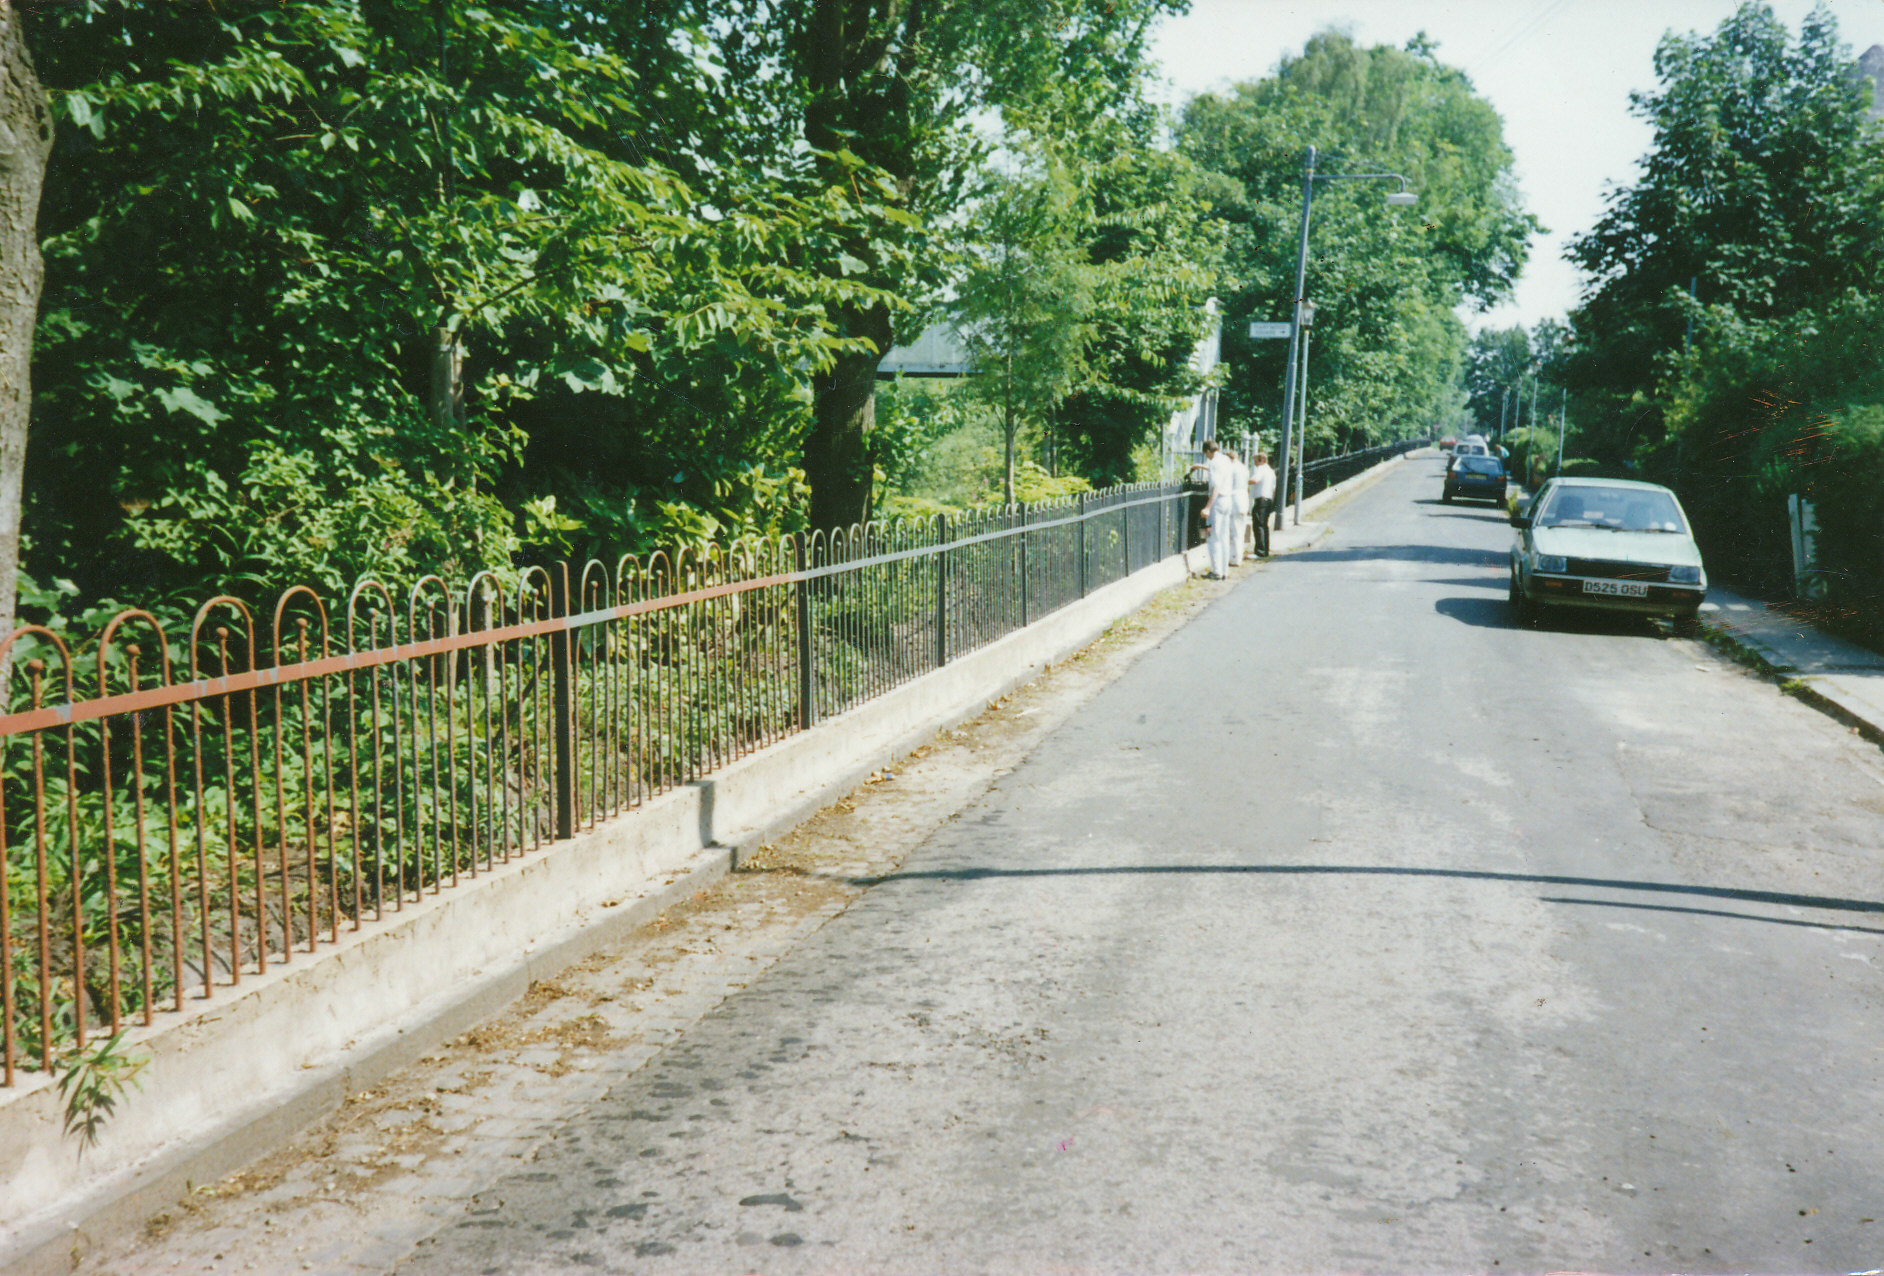 Railings after fence and concrete repair and painting, circa 1990